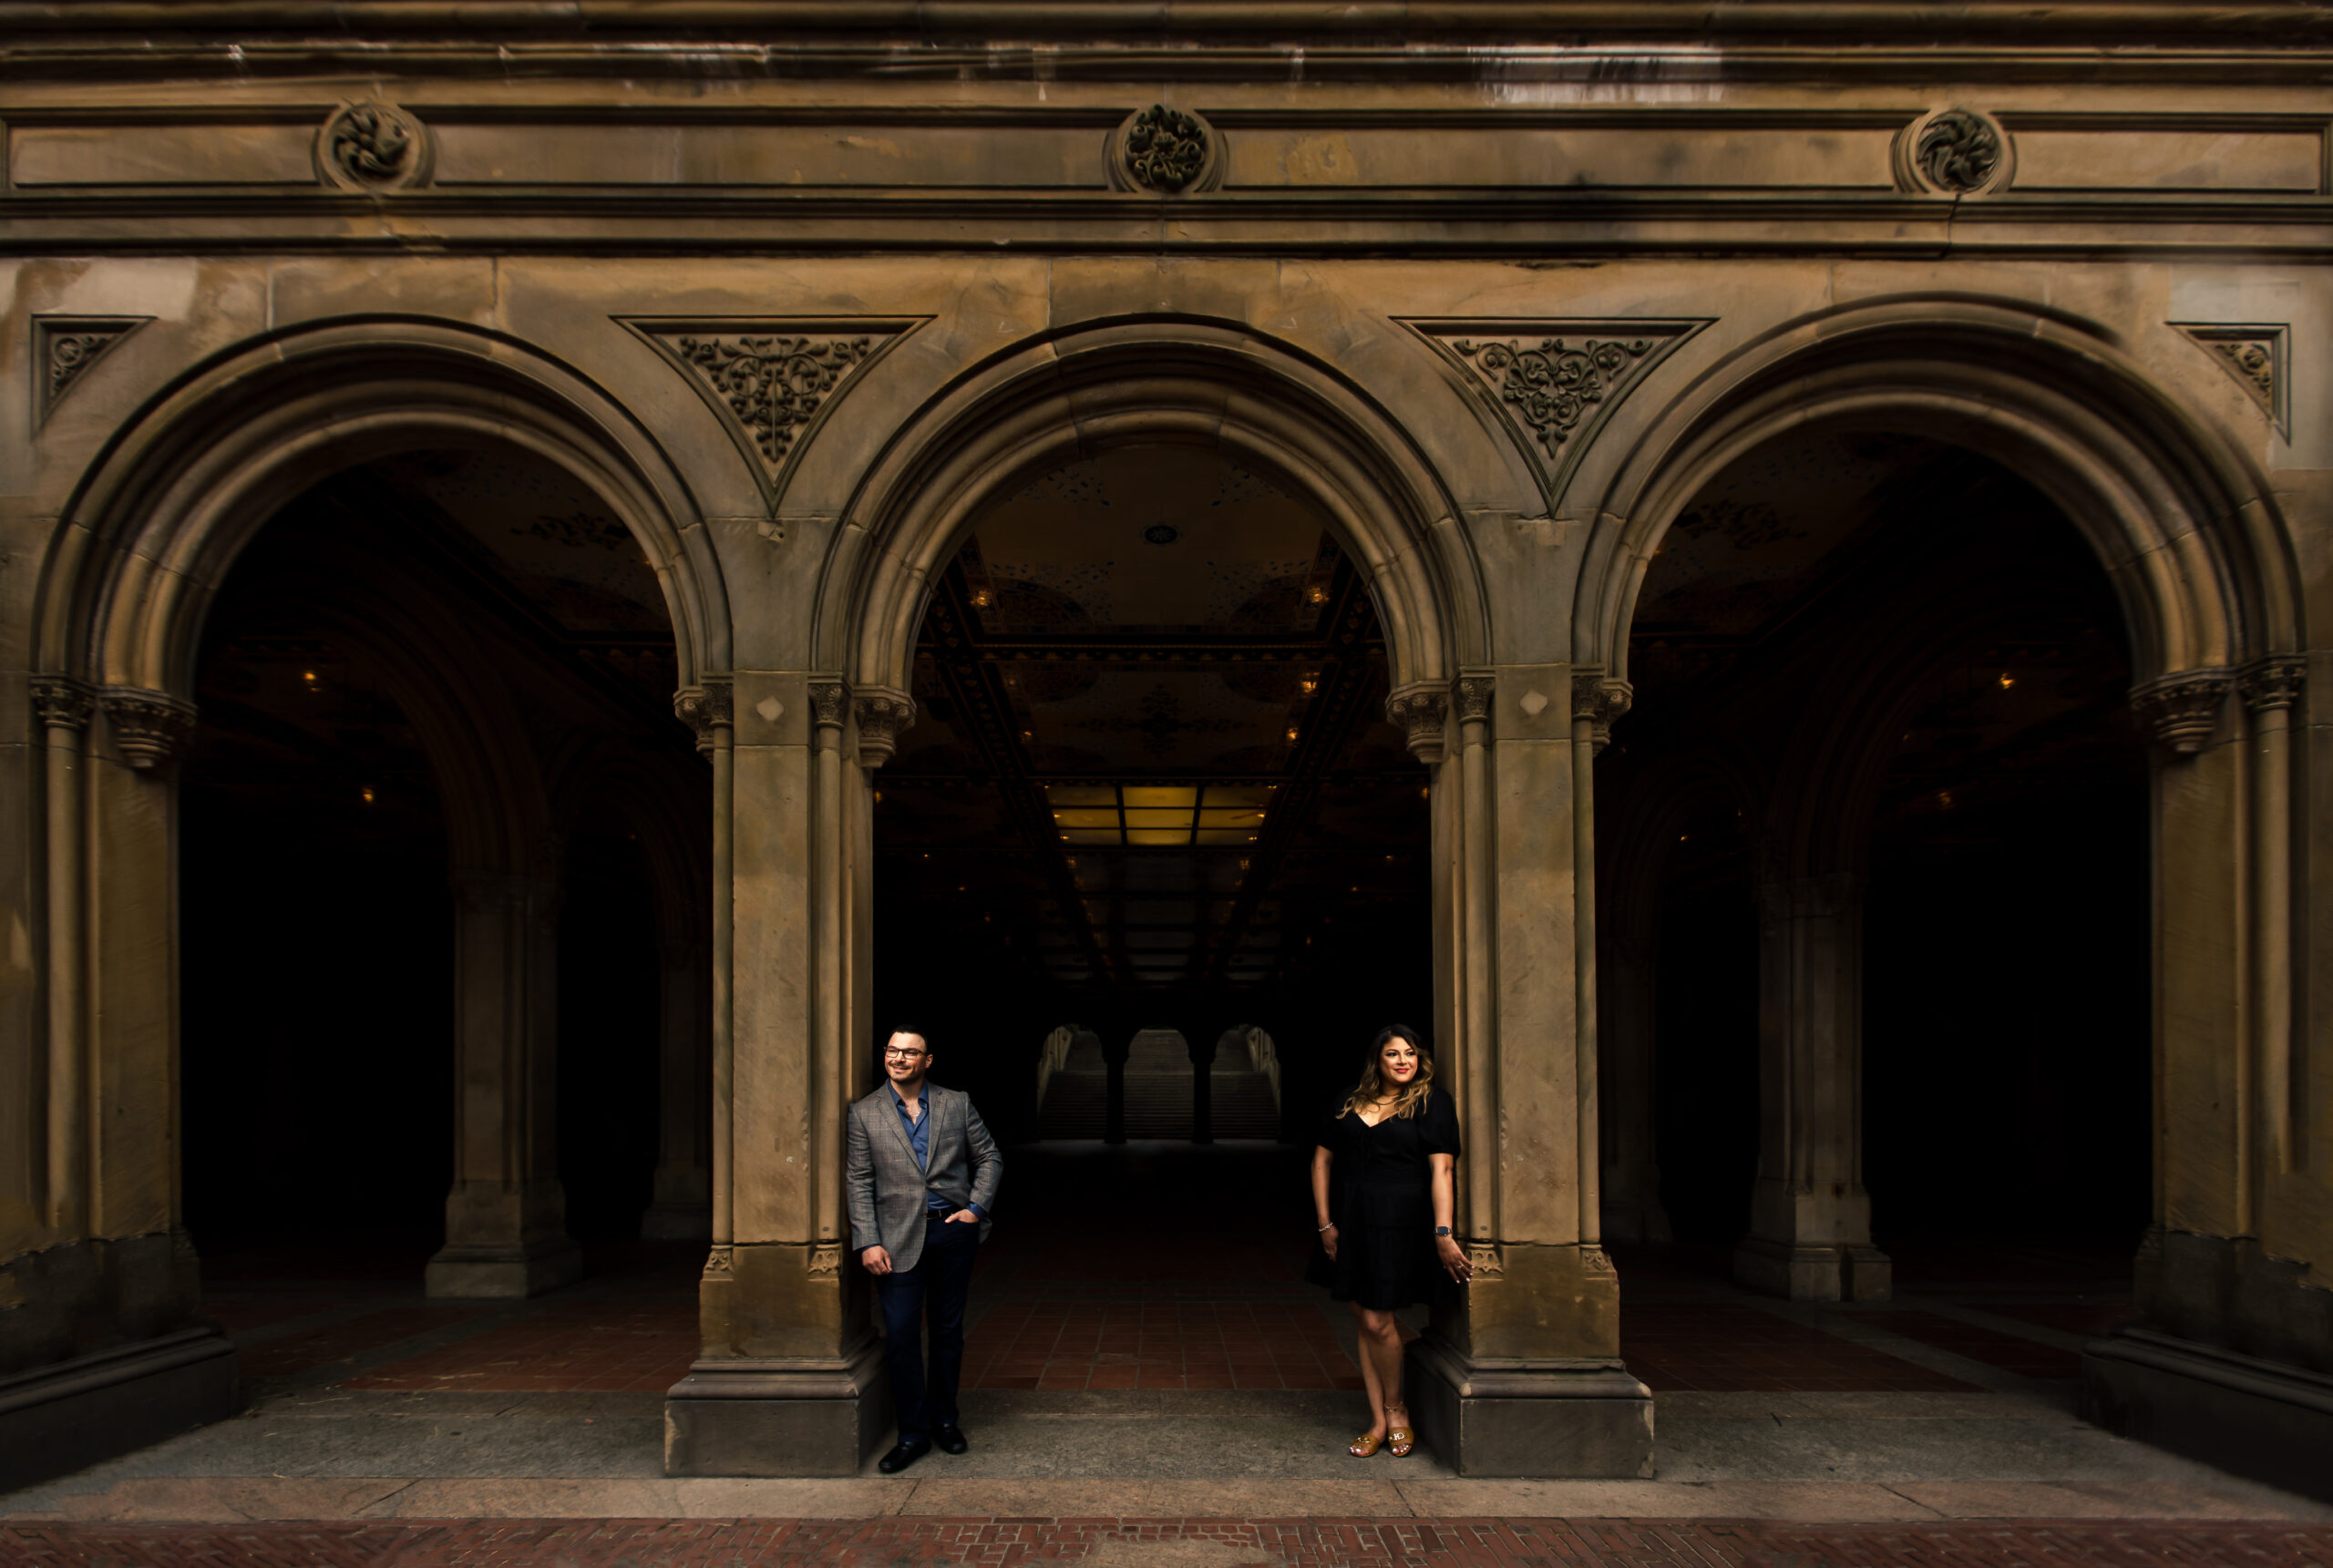 A couple captured by New Jersey Wedding Photographer Jarot Bocanegra, standing in front of arches in an old building.